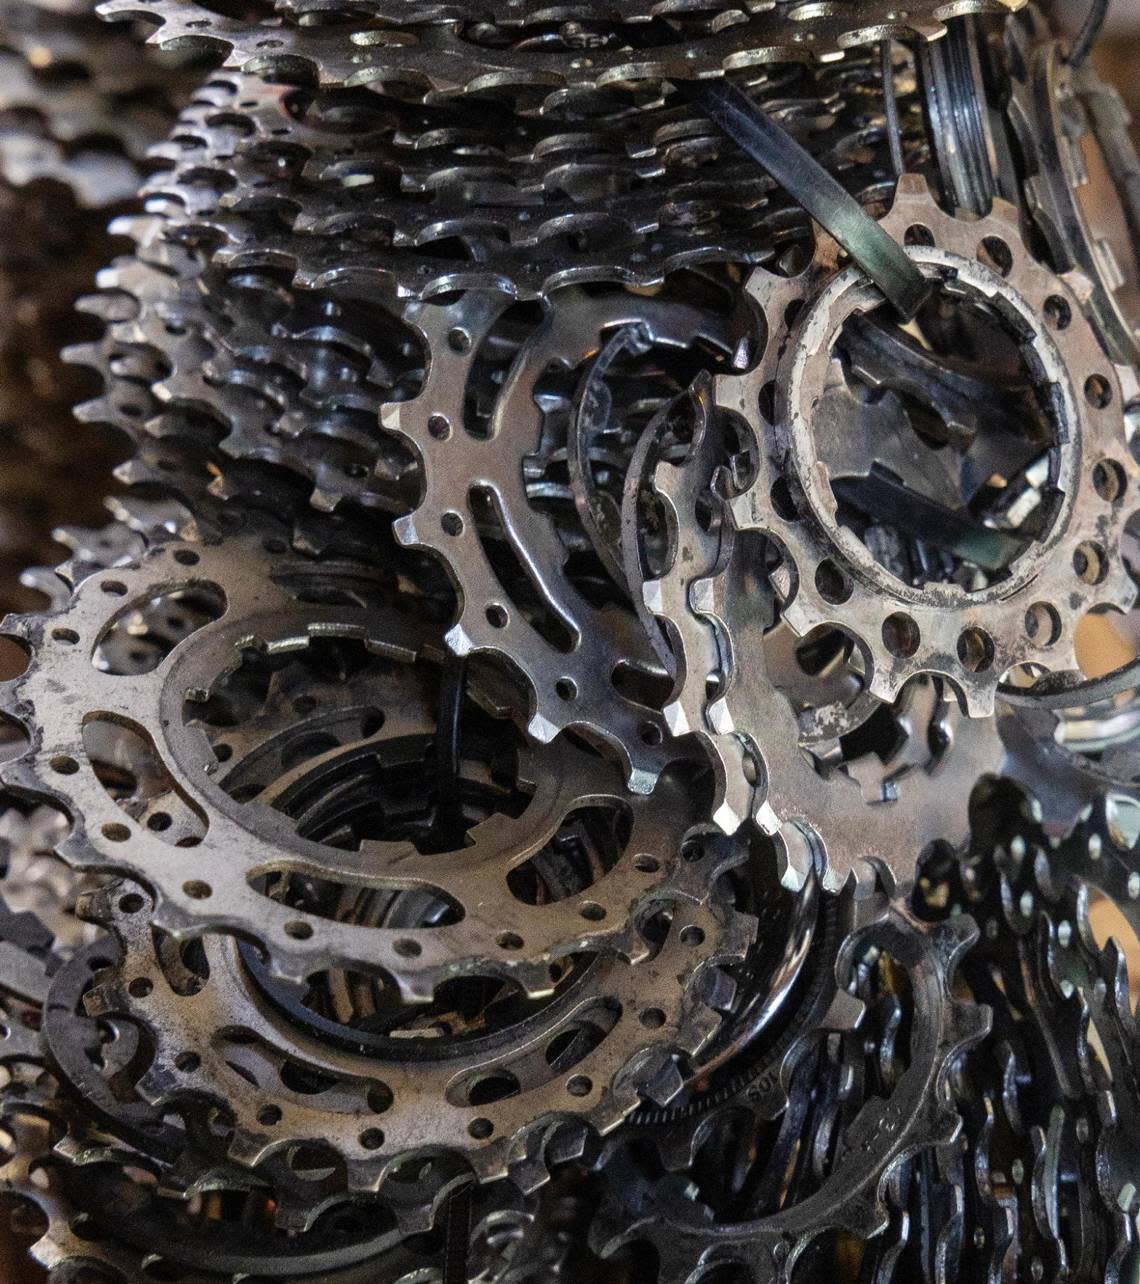 Gears are stacked in a room filled with parts for fixing bicycles at the Boise Bicycle Project.